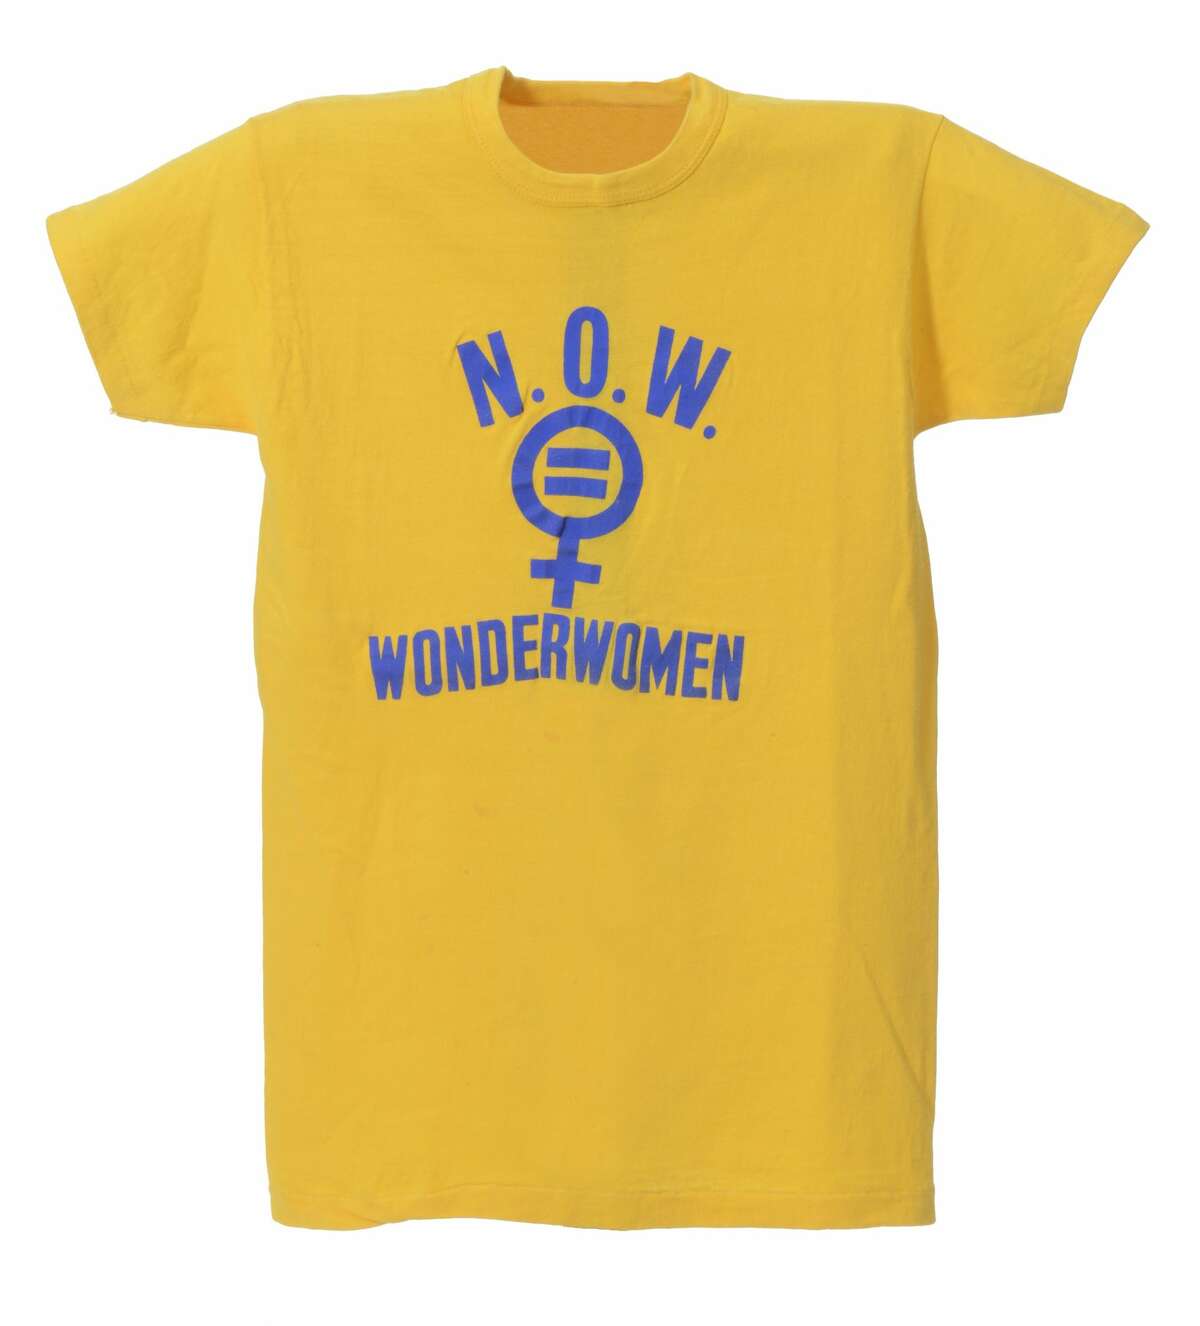 National Organization for Women Wonderwomen T-shirt, circa 1975. This shirt was donated to the museum as part of a collection of NYS NOW material by Eileen Kelly.